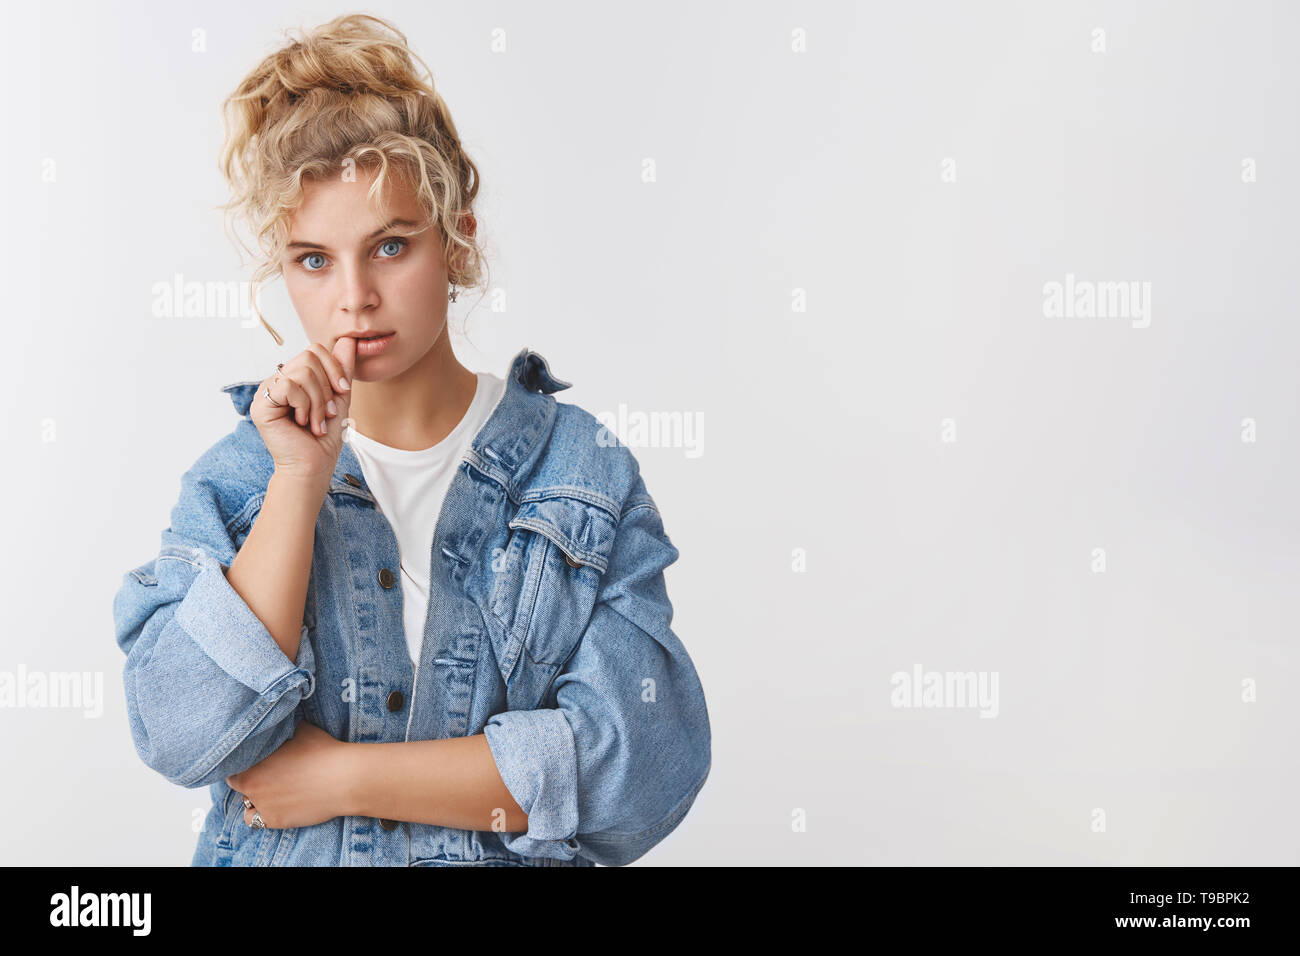 Perplexed troubled serious-looking creative smart blond curly-haired blond woman bite thumb look focused solve troublesome situation, thinking make Stock Photo